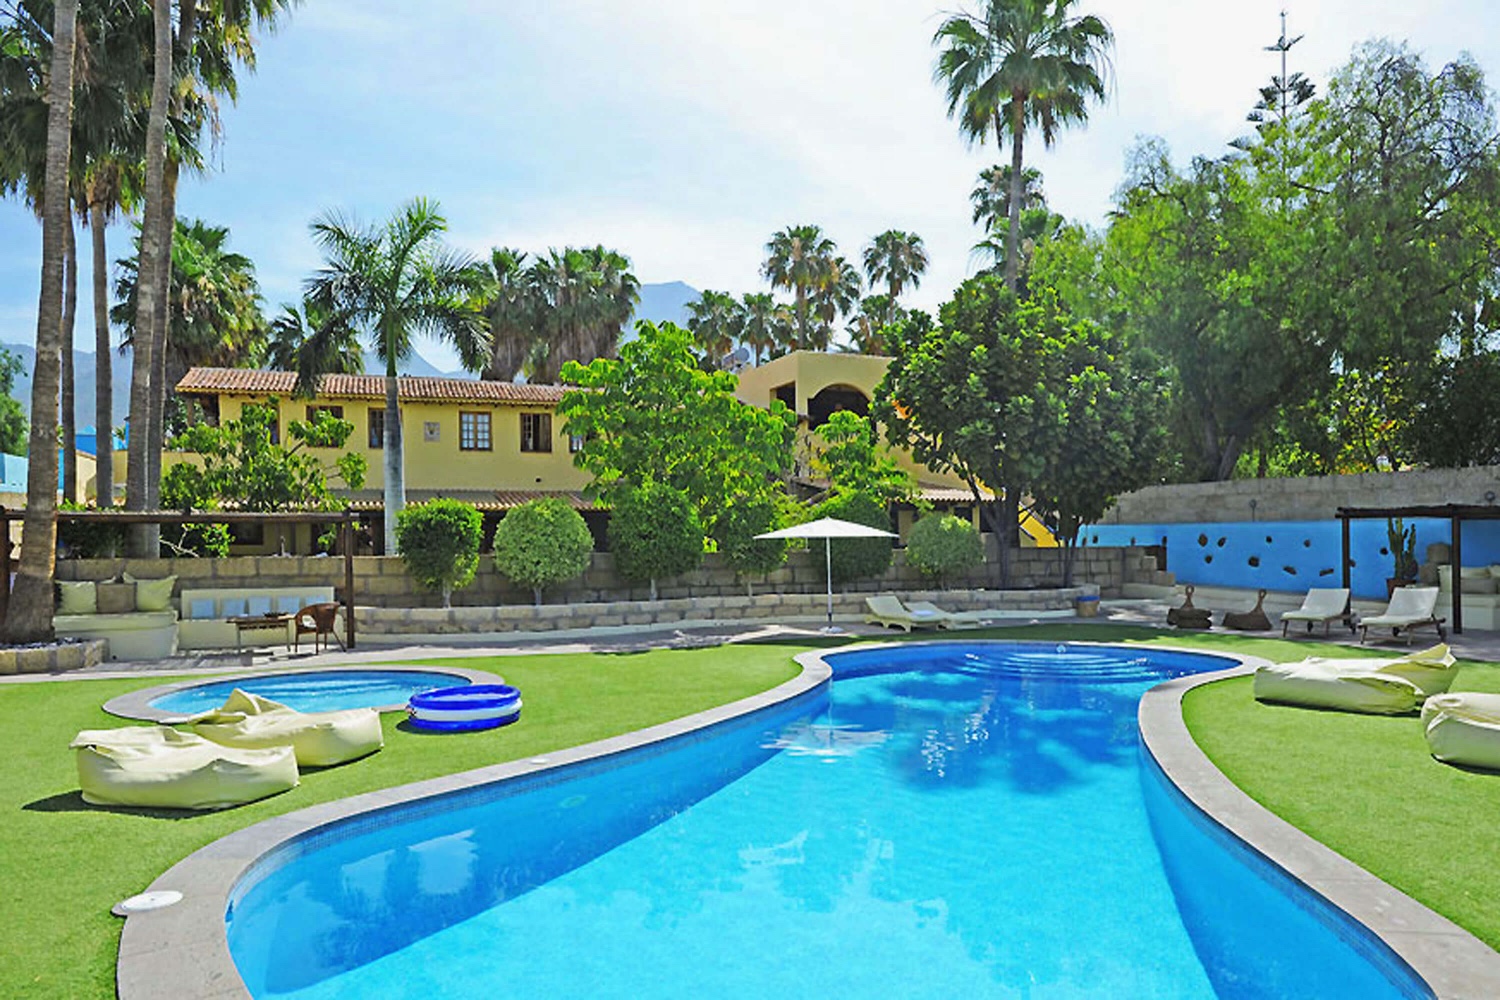 Holiday home with large communal pool area for a relaxing holiday in the south of Tenerife